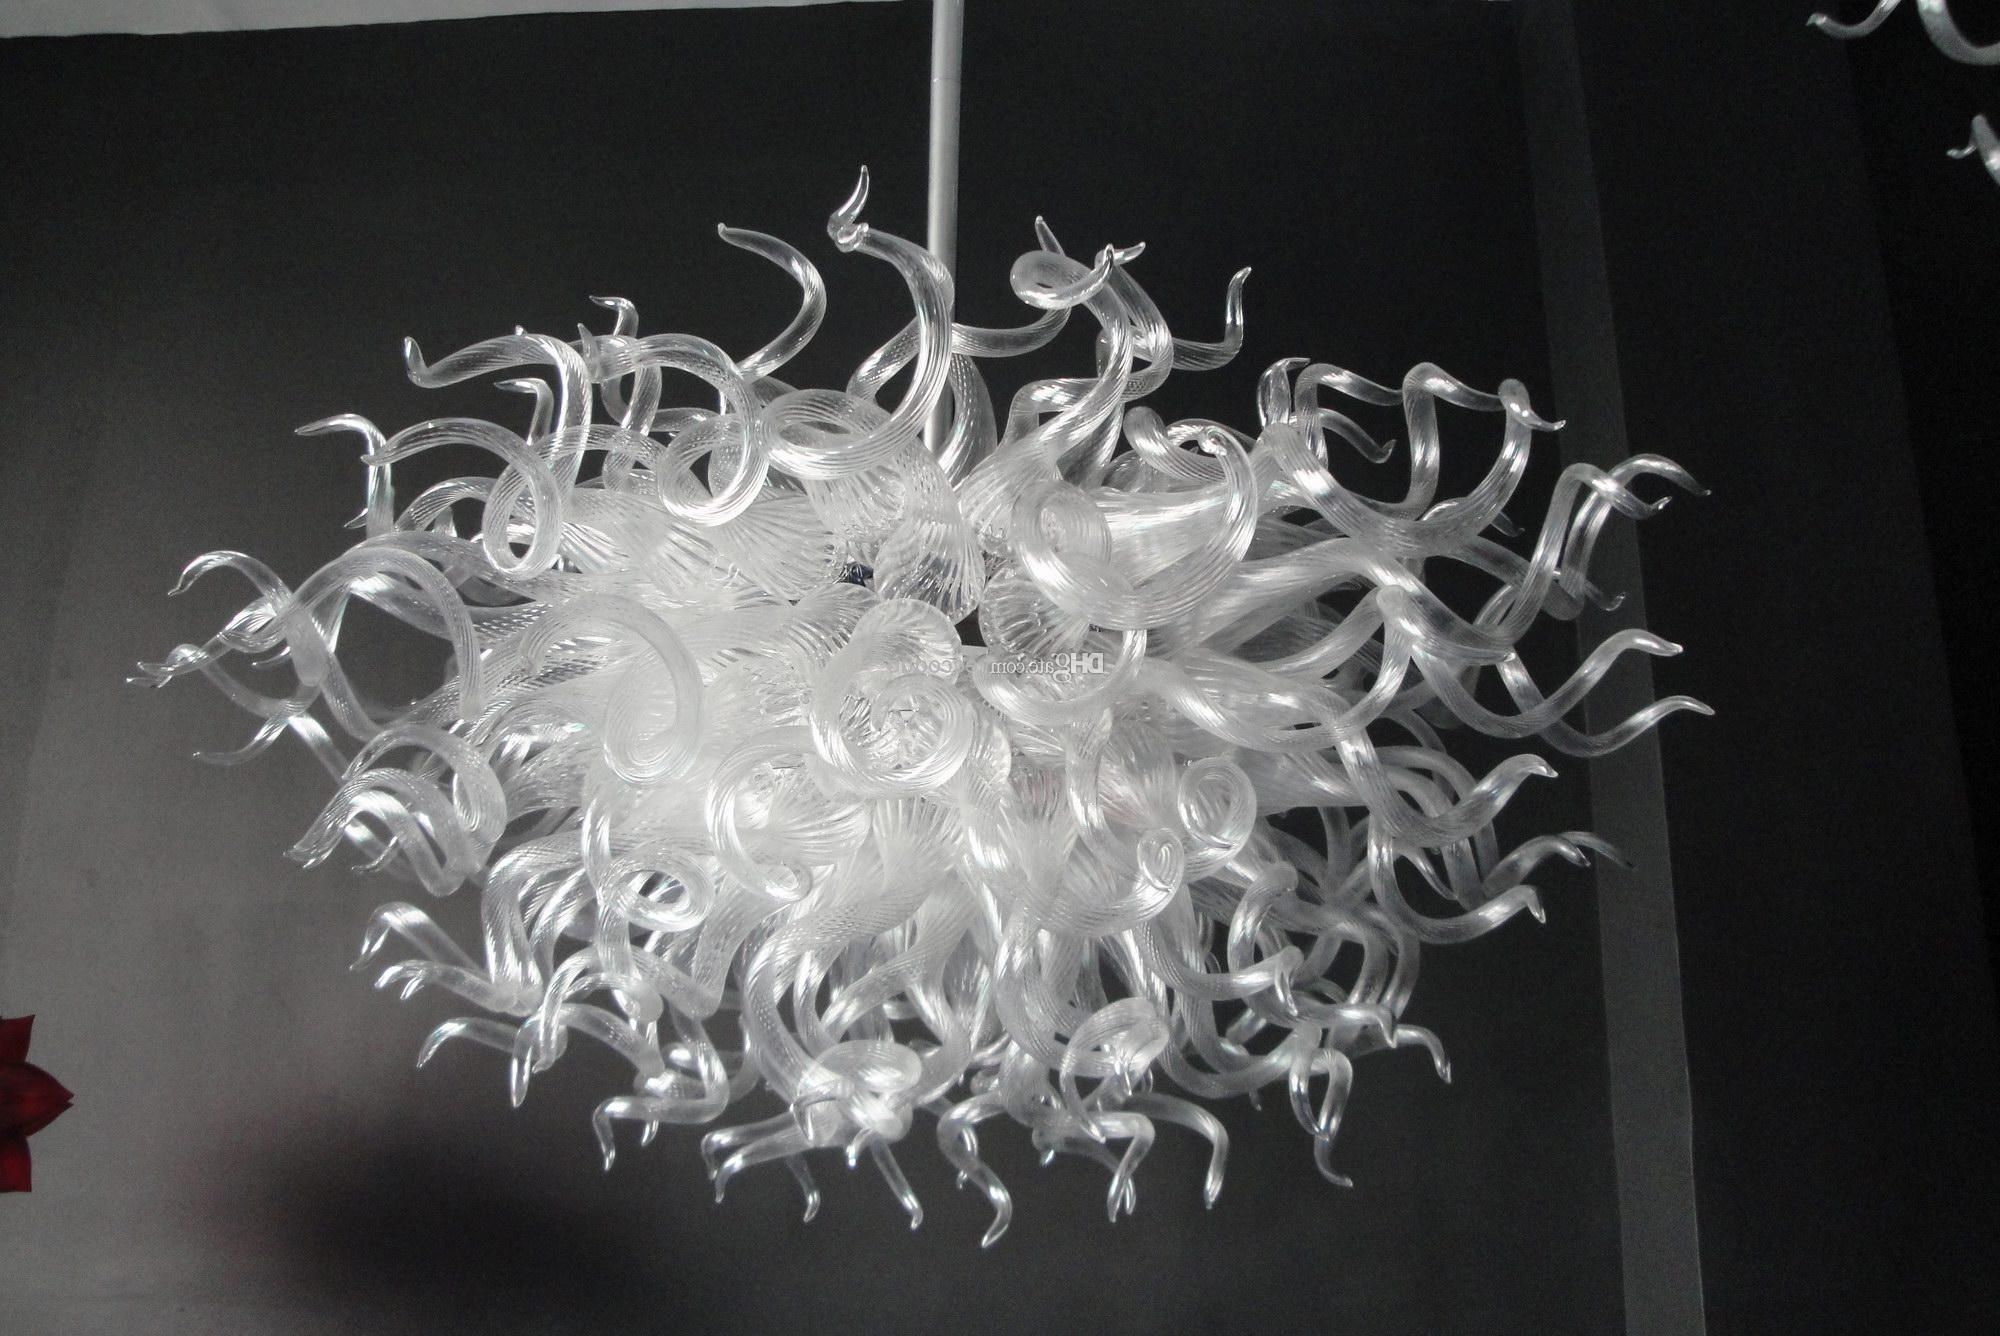 [%2018 100% Hand Blown Artistic Chandelier Lamp Dale Chihuly Murano With Regard To Current Glass Chandeliers|Glass Chandeliers For Widely Used 2018 100% Hand Blown Artistic Chandelier Lamp Dale Chihuly Murano|Latest Glass Chandeliers Within 2018 100% Hand Blown Artistic Chandelier Lamp Dale Chihuly Murano|Well Known 2018 100% Hand Blown Artistic Chandelier Lamp Dale Chihuly Murano Pertaining To Glass Chandeliers%] (View 1 of 15)